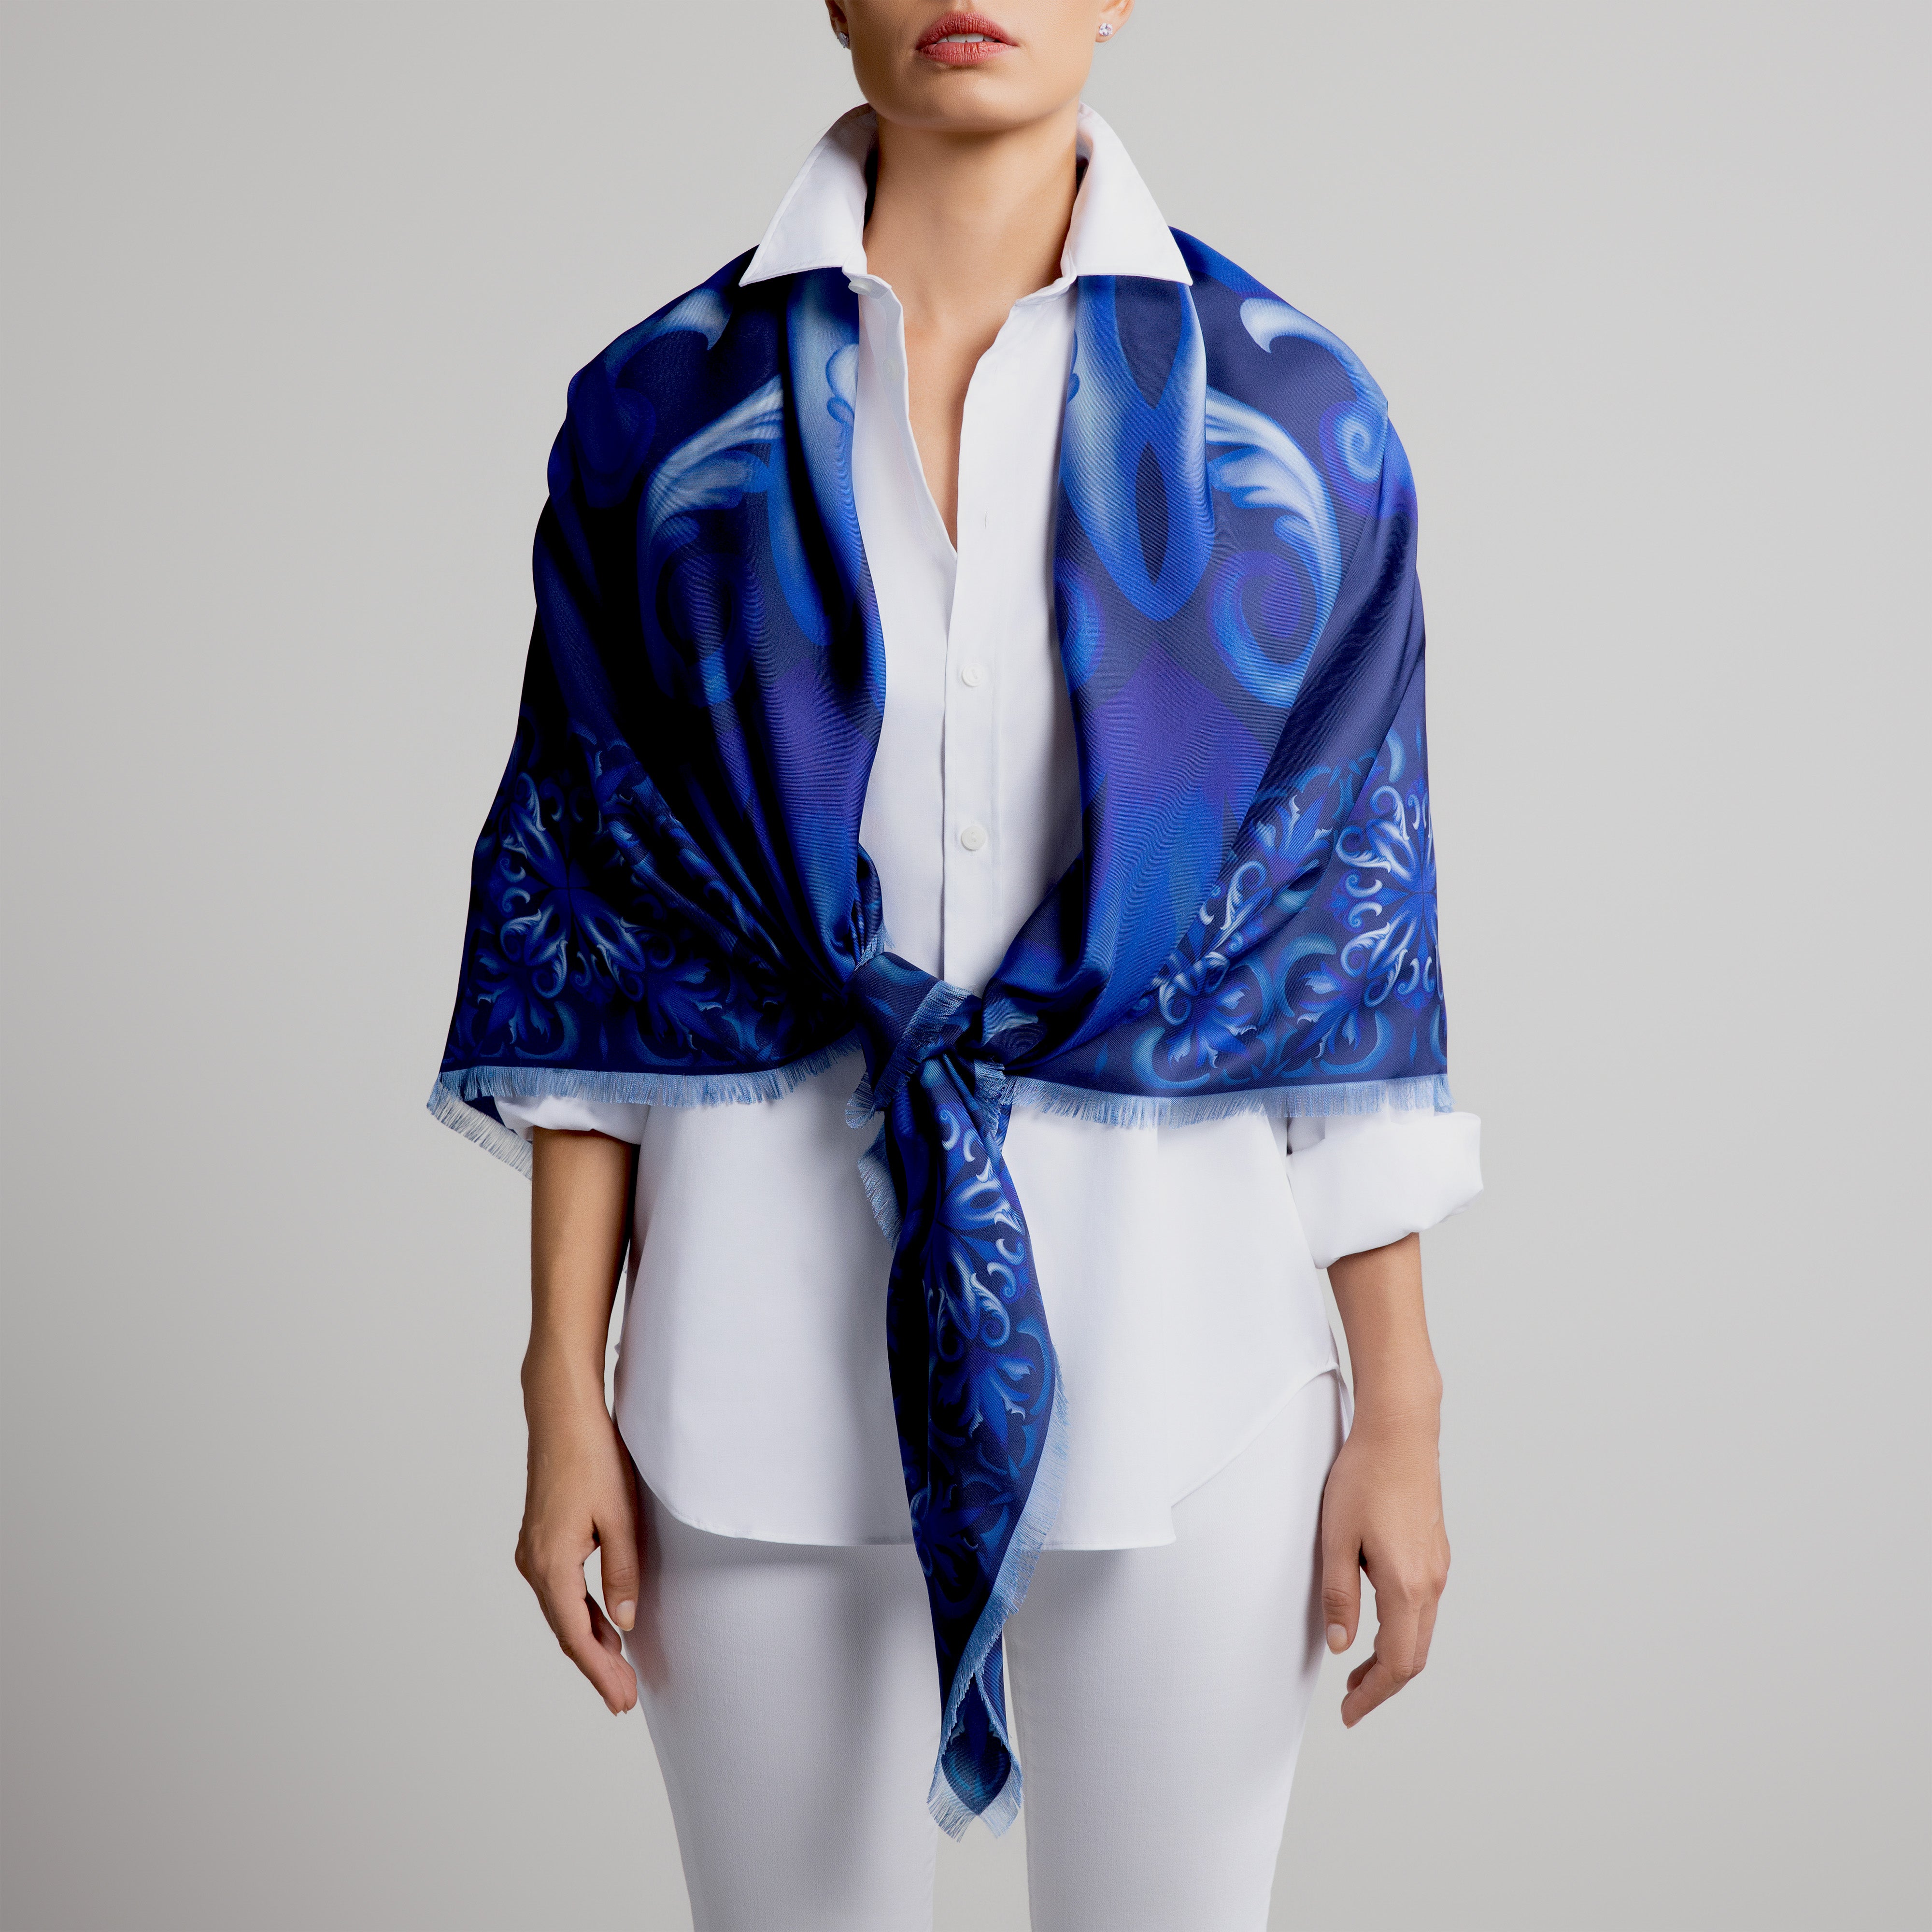 Porto Grande Silk Scarf in Navy Blue with Hand-Feathered Edges